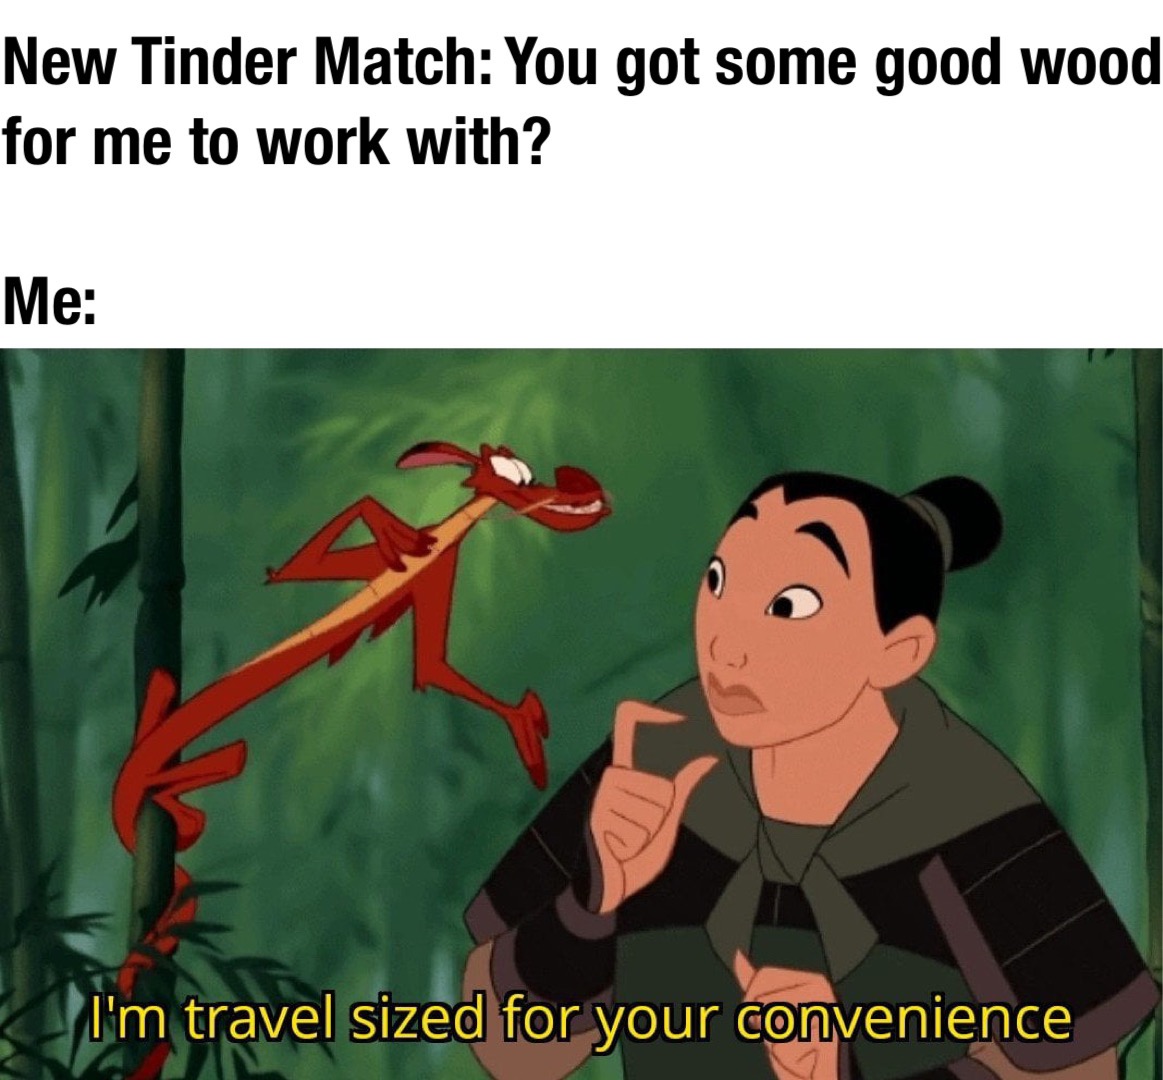 dank memes - mulan meeting mushu - New Tinder Match You got some good wood for me to work with? Me I'm travel sized for your convenience